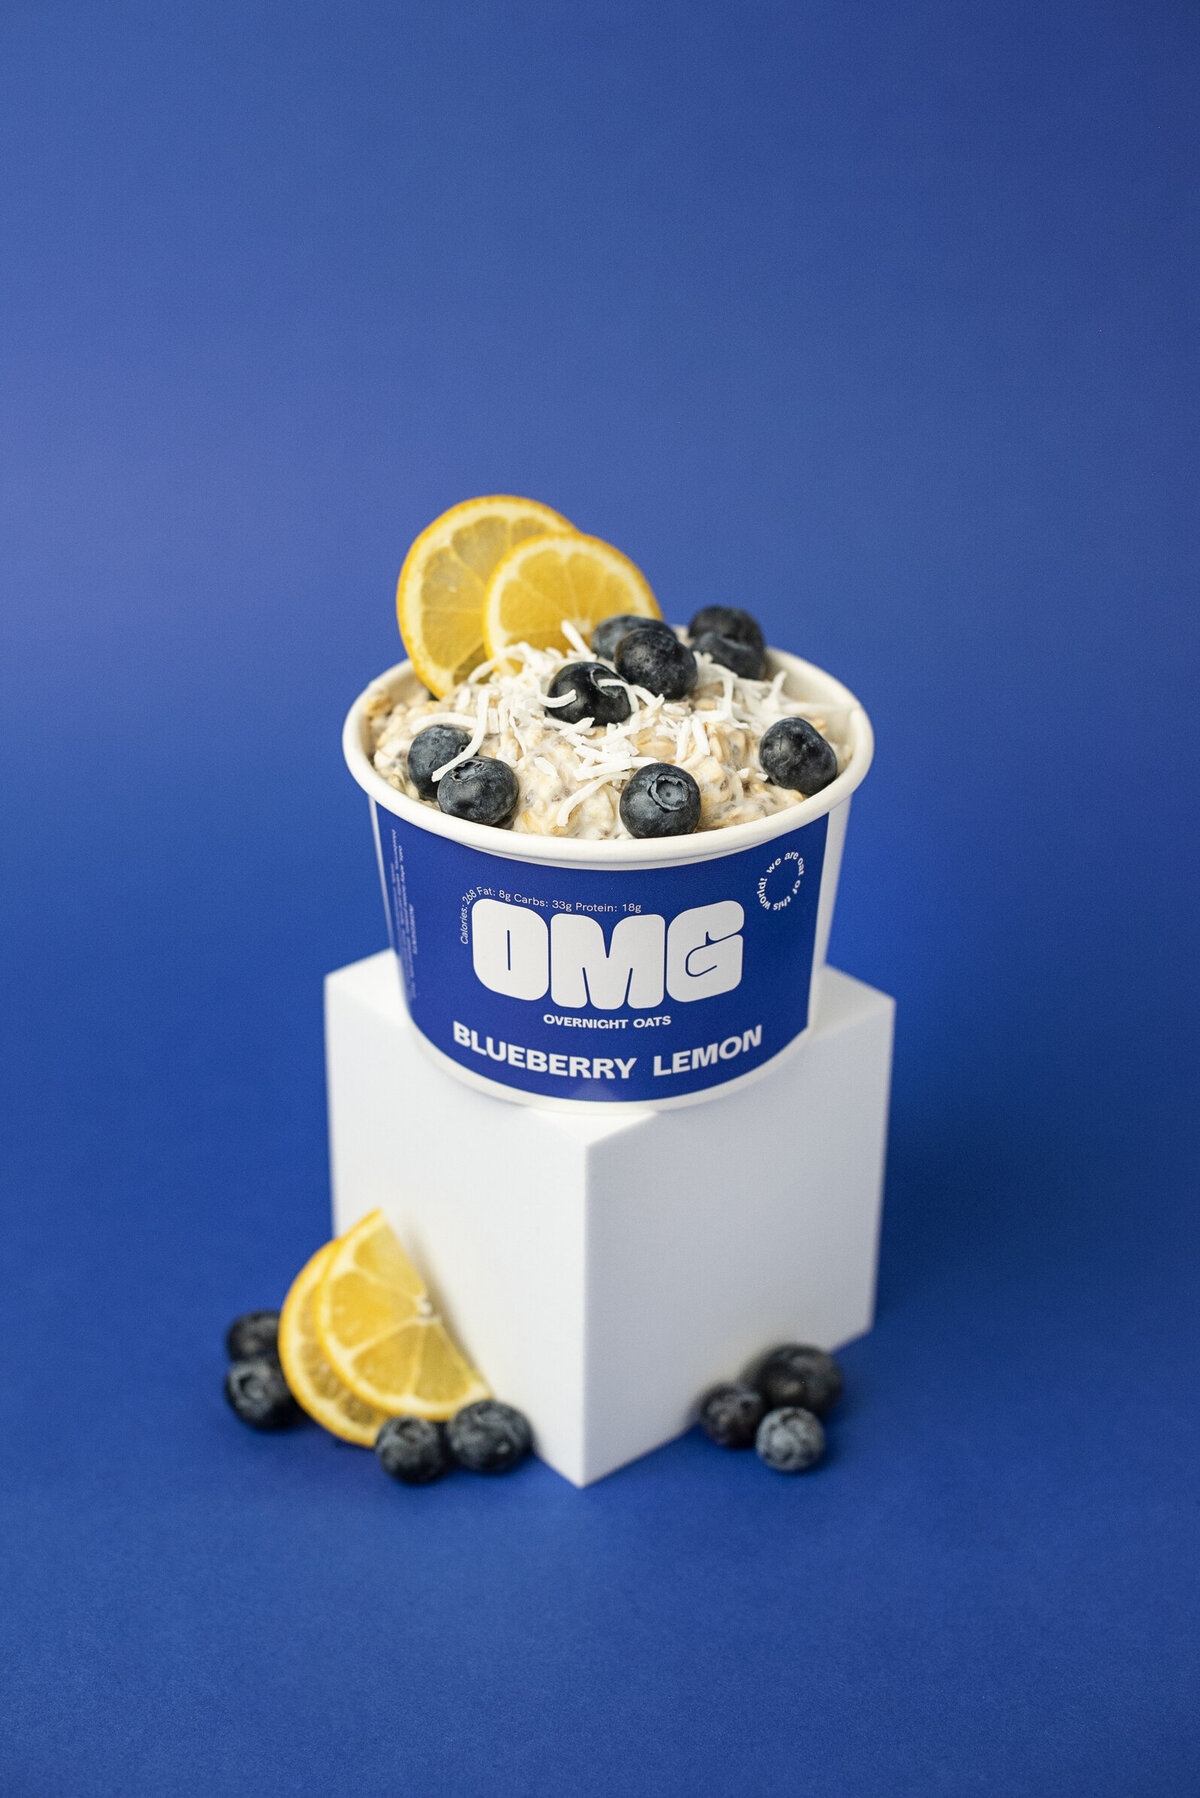 Carton of oatmeal topped with blue berries and lemon sitting on a white block